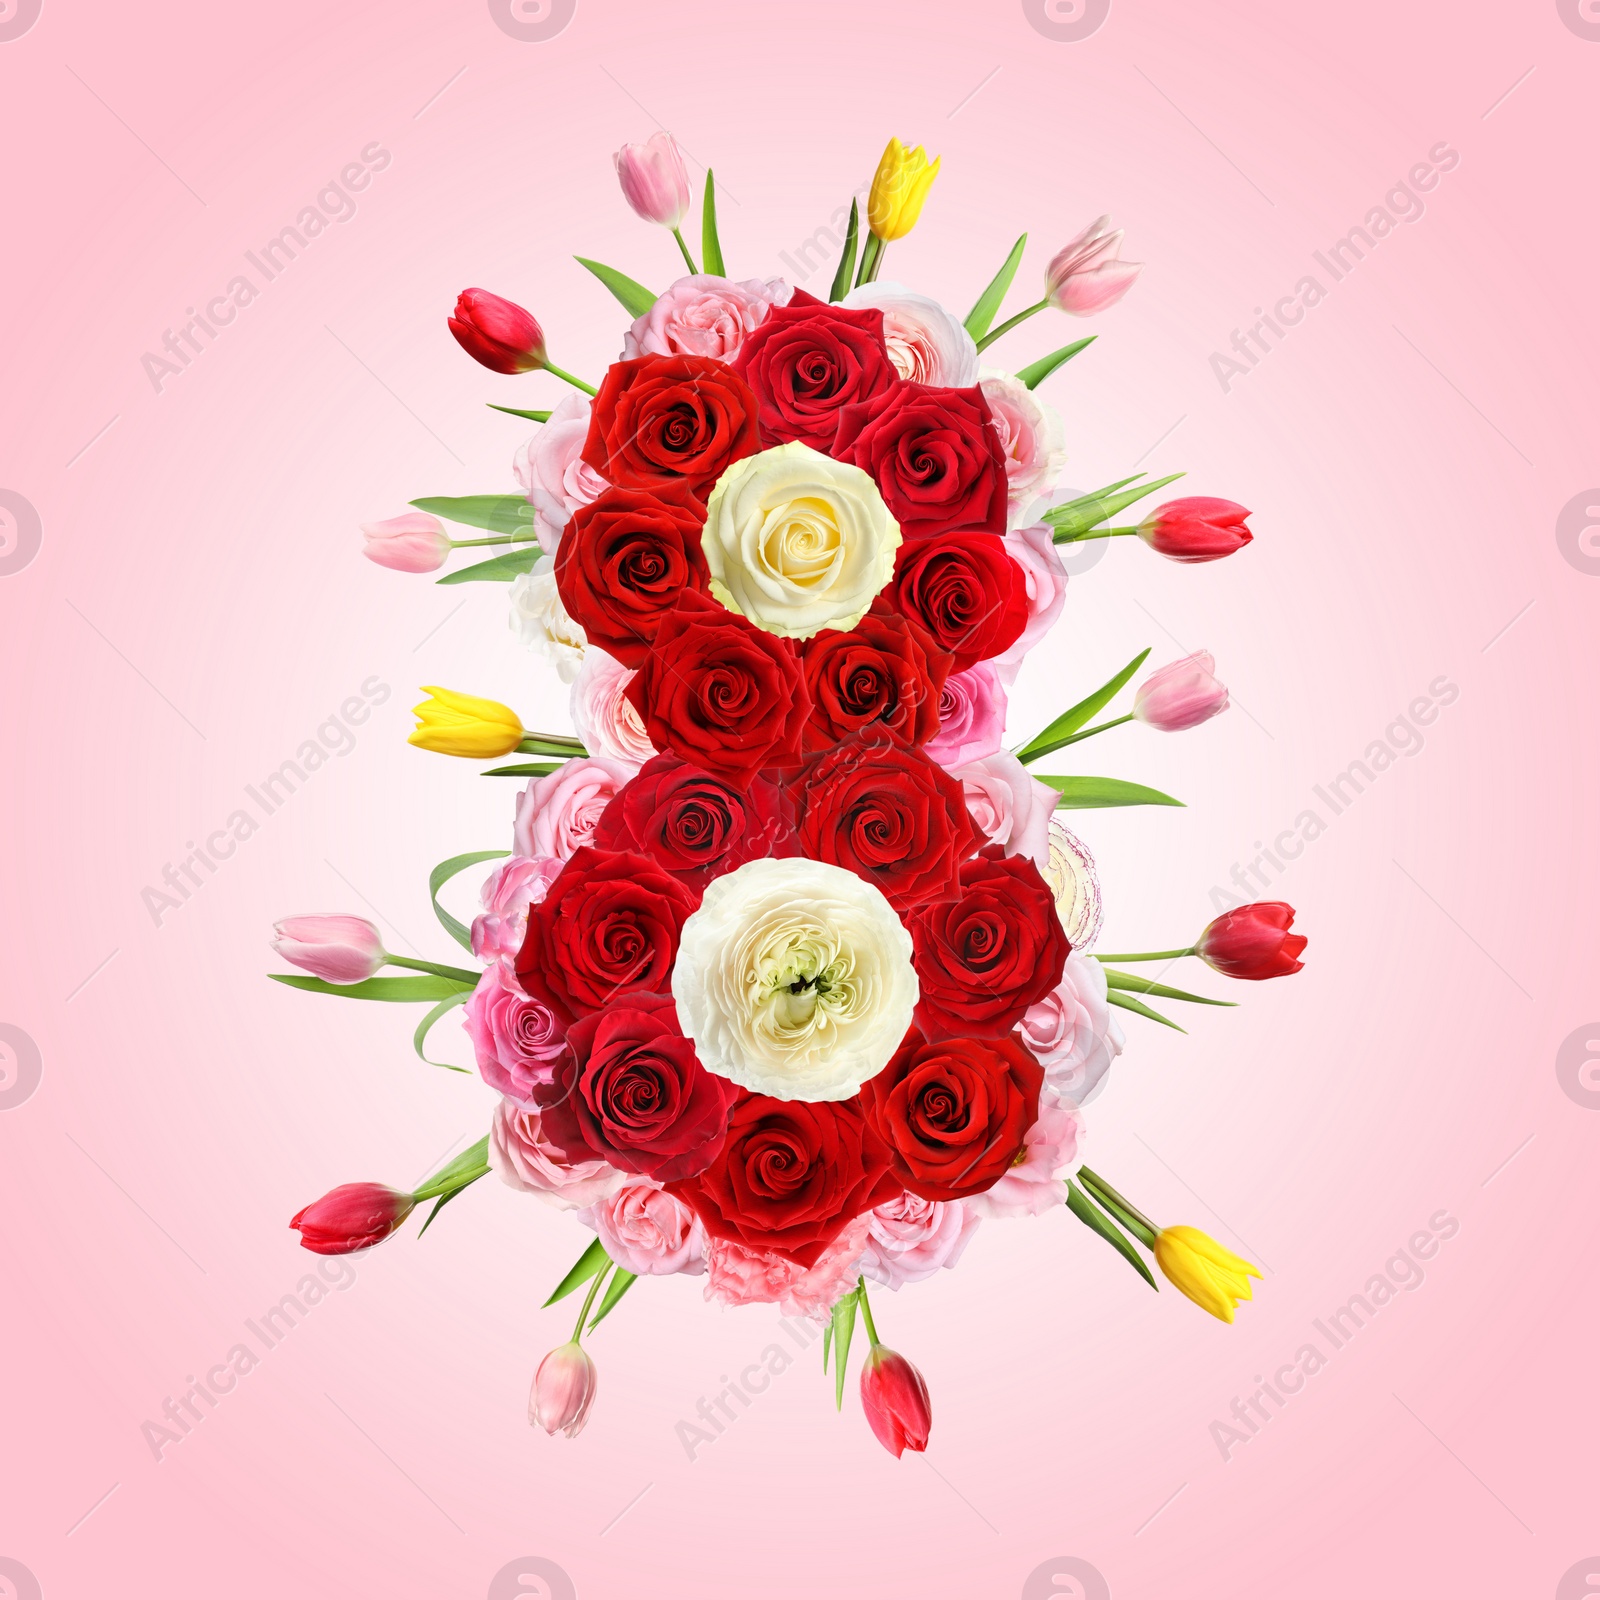 Image of International Women's Day - March 8. Card design with number 8 of bright flowers on pink background